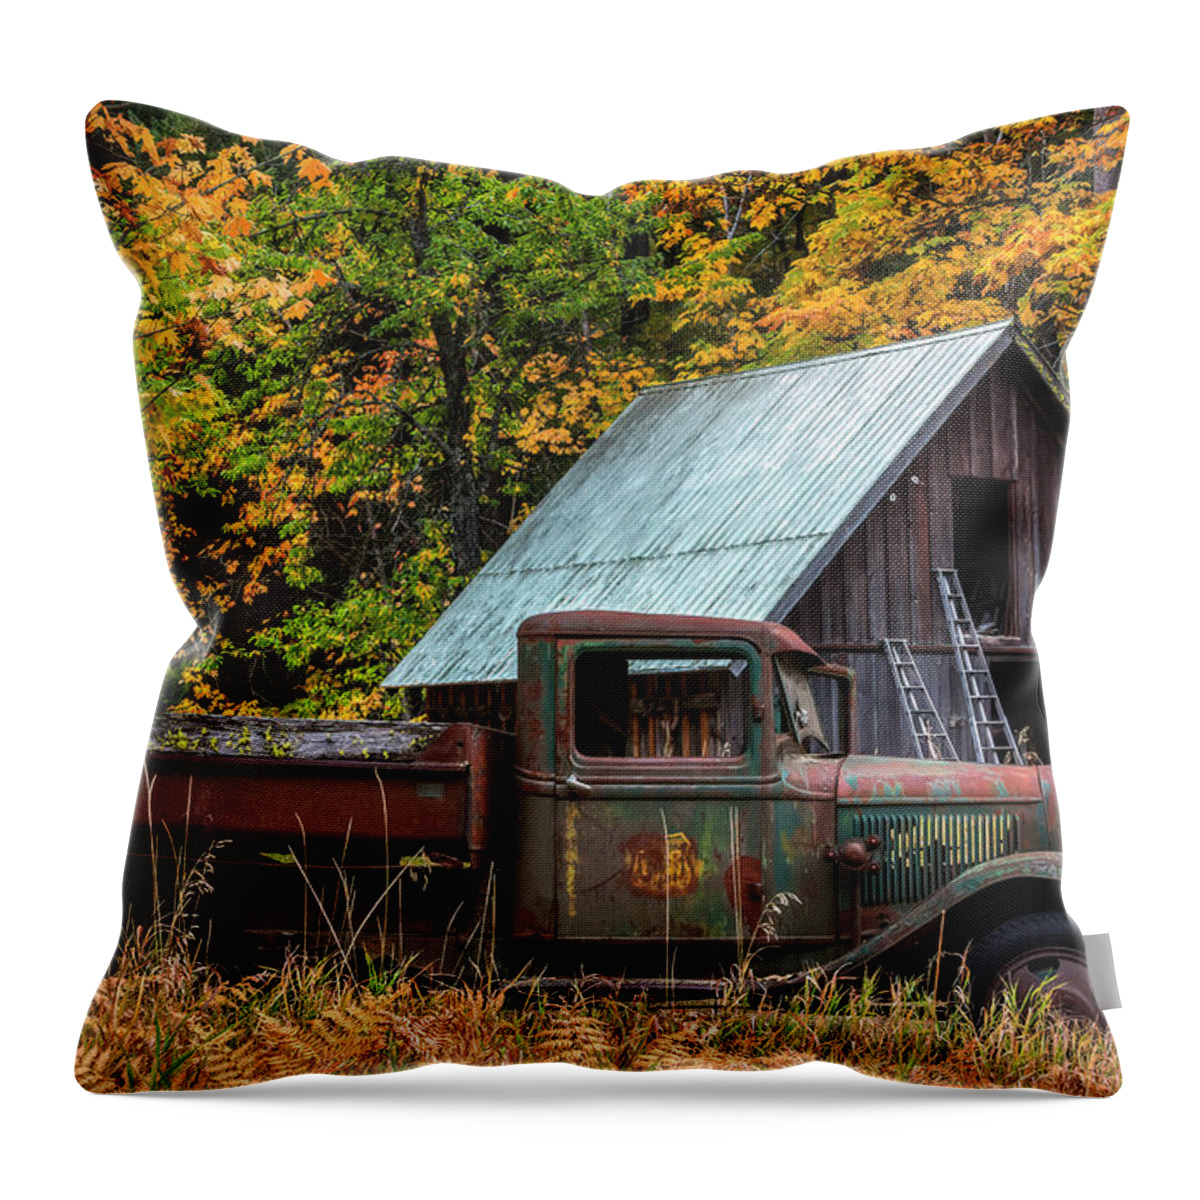 Bucker Orchard Throw Pillow featuring the photograph Buckner Orchard by Mark Kiver